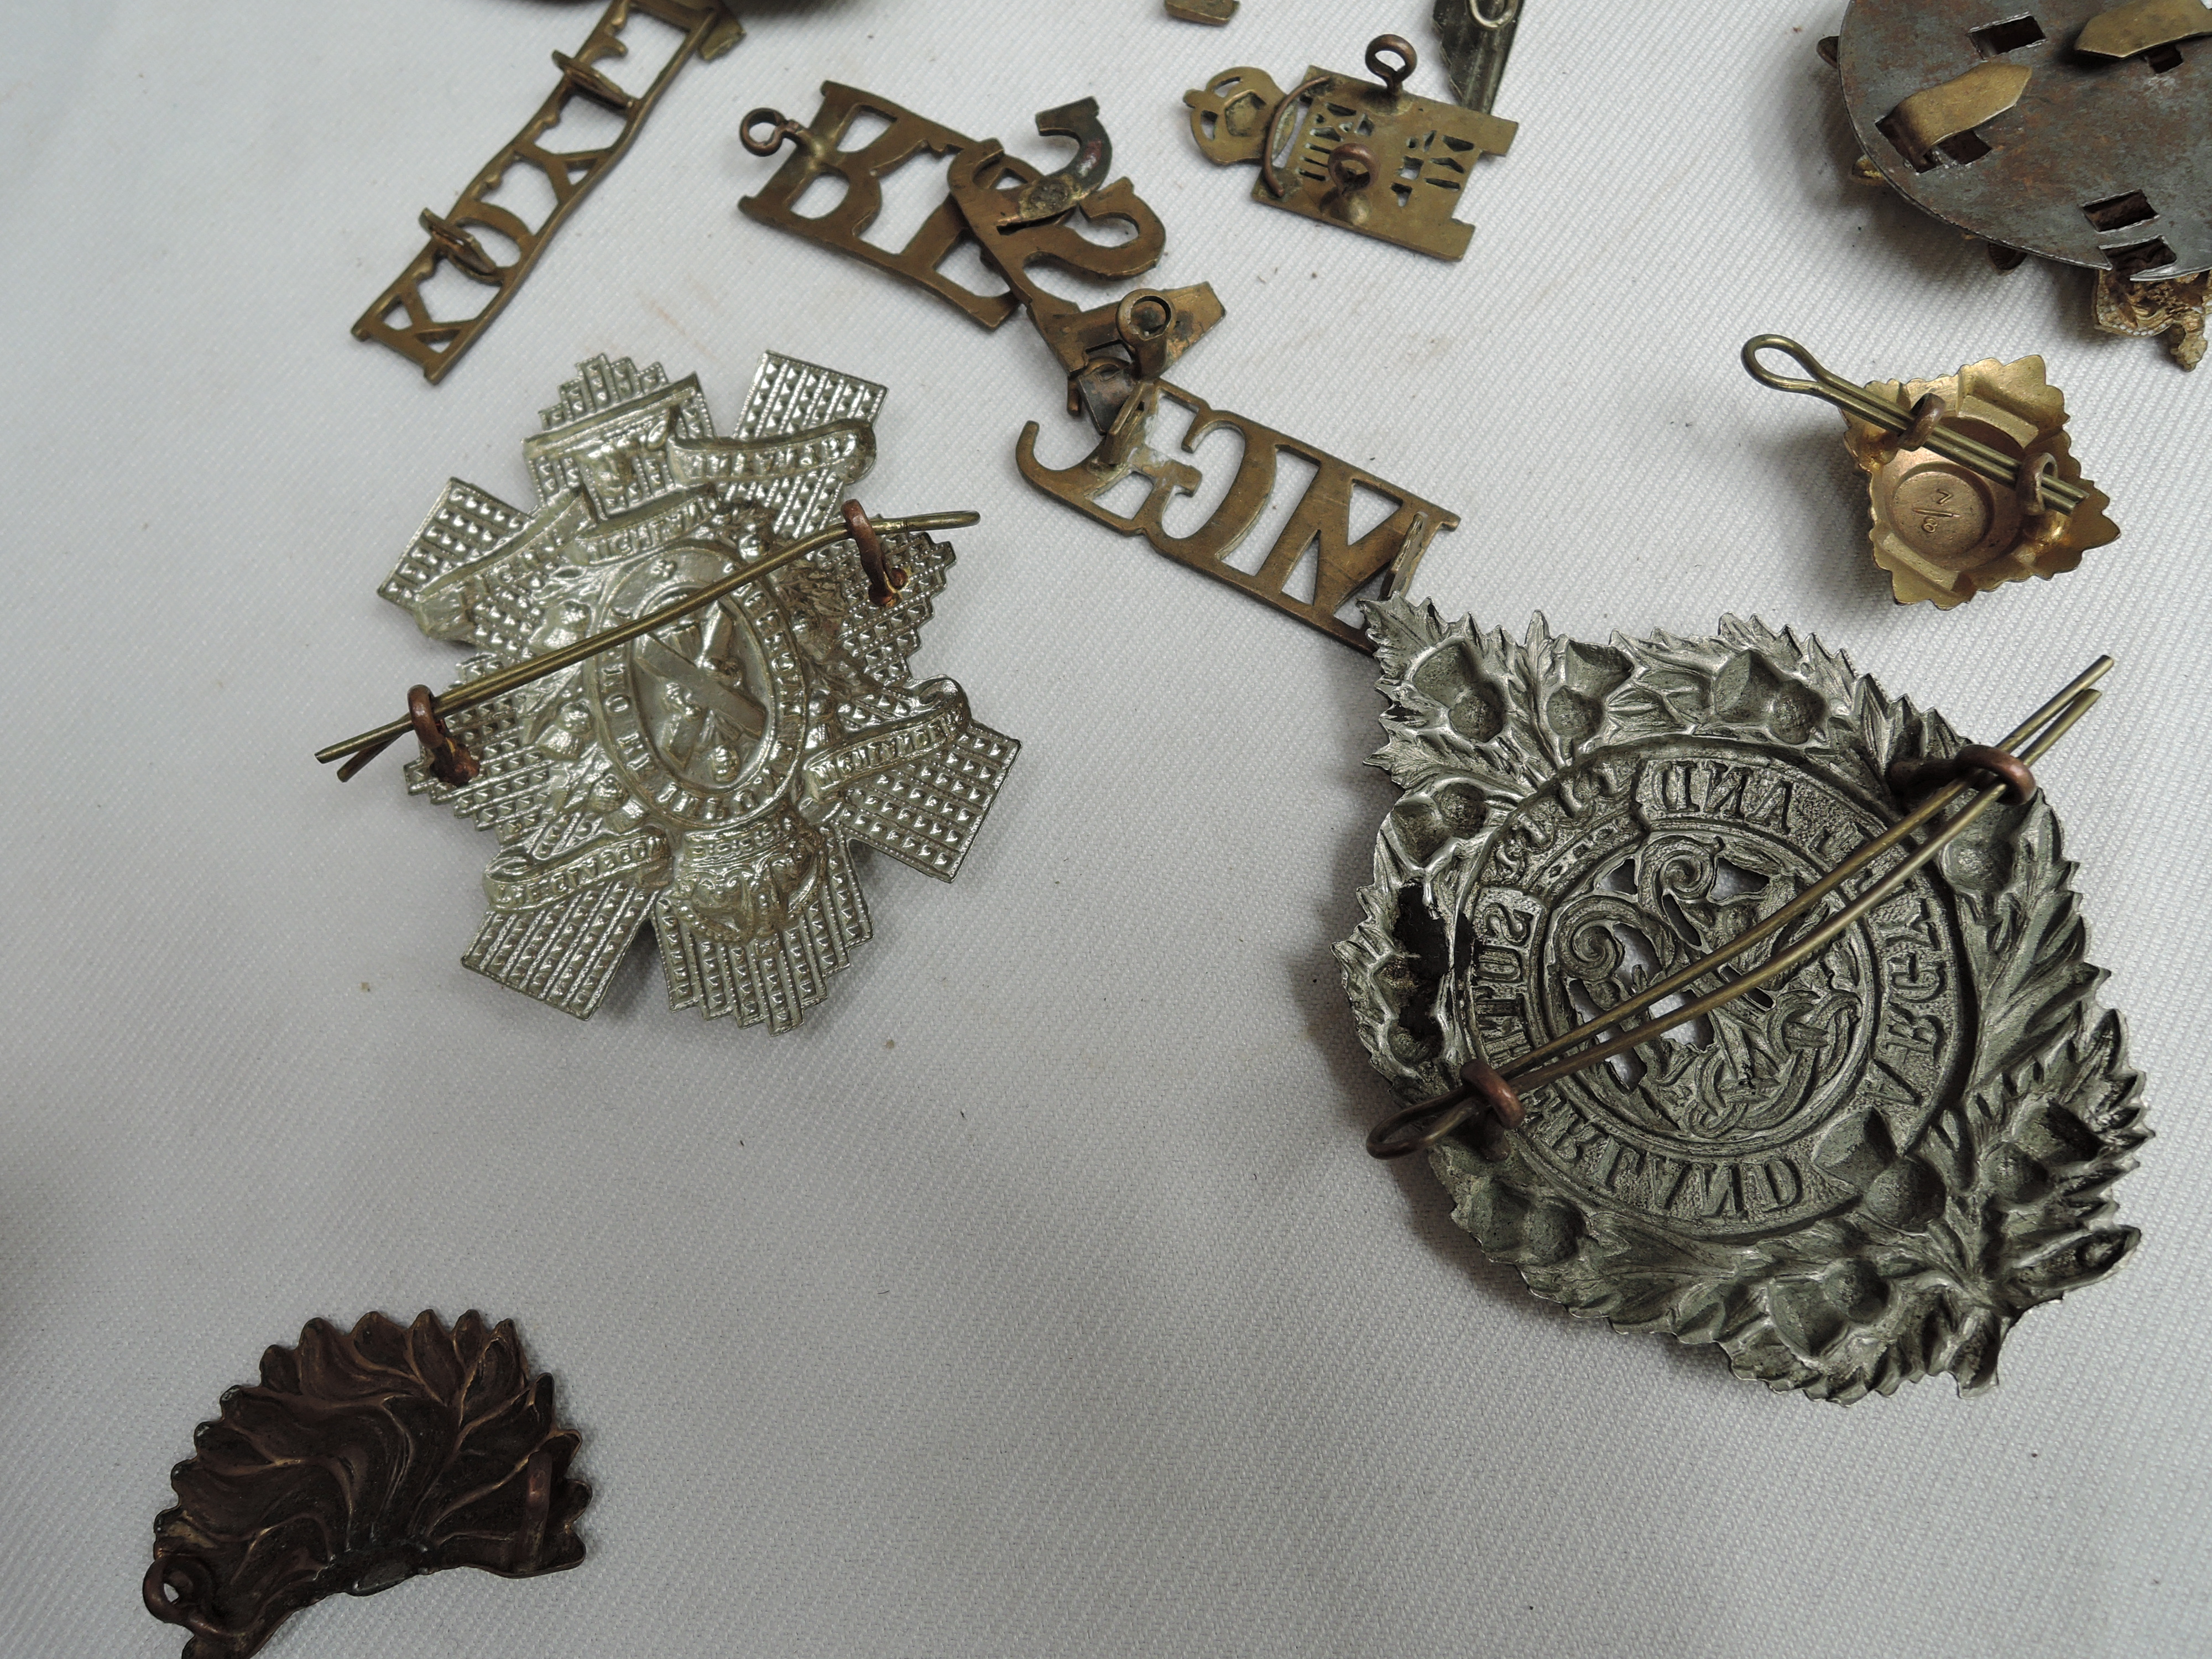 A collection of Army/Military Cap Badges along with a small collection of Coins - Image 6 of 7